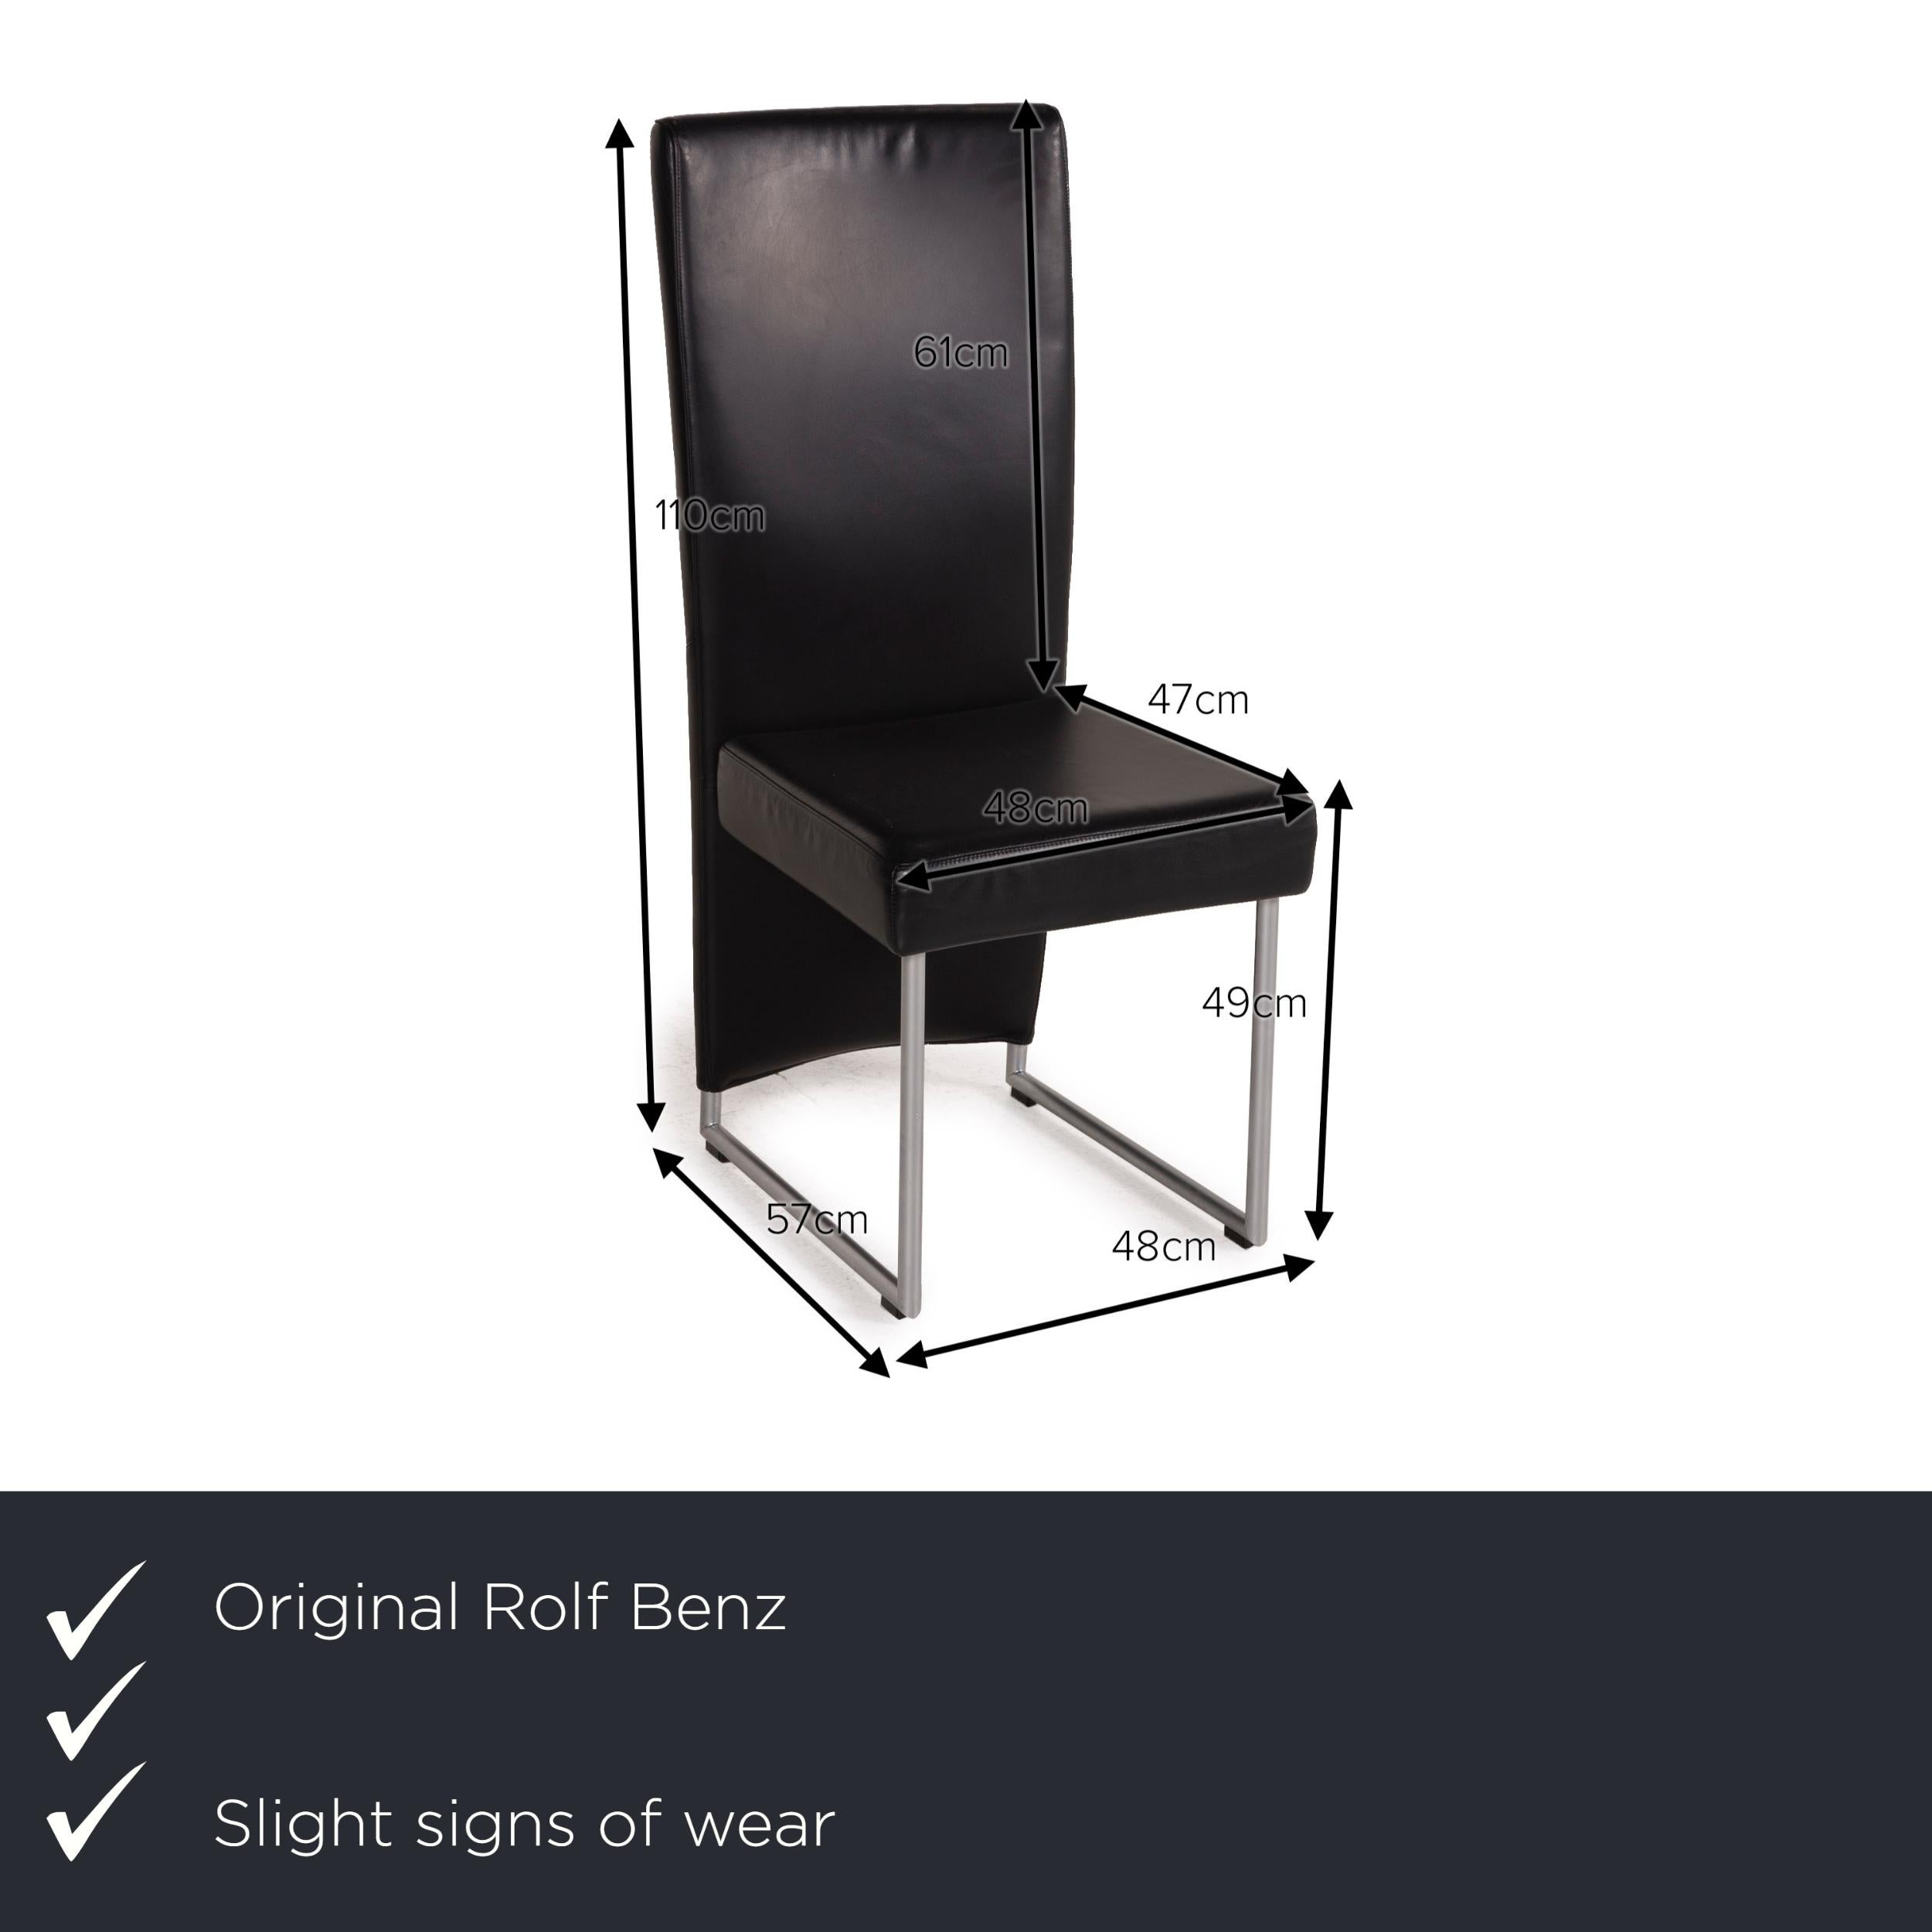 We present to you a Rolf Benz black leather chair.
 

 Product measurements in centimeters:
 

Depth: 57
Width: 48
Height: 110
Seat height: 49
Seat depth: 47
Seat width: 48
Back height: 61.

 